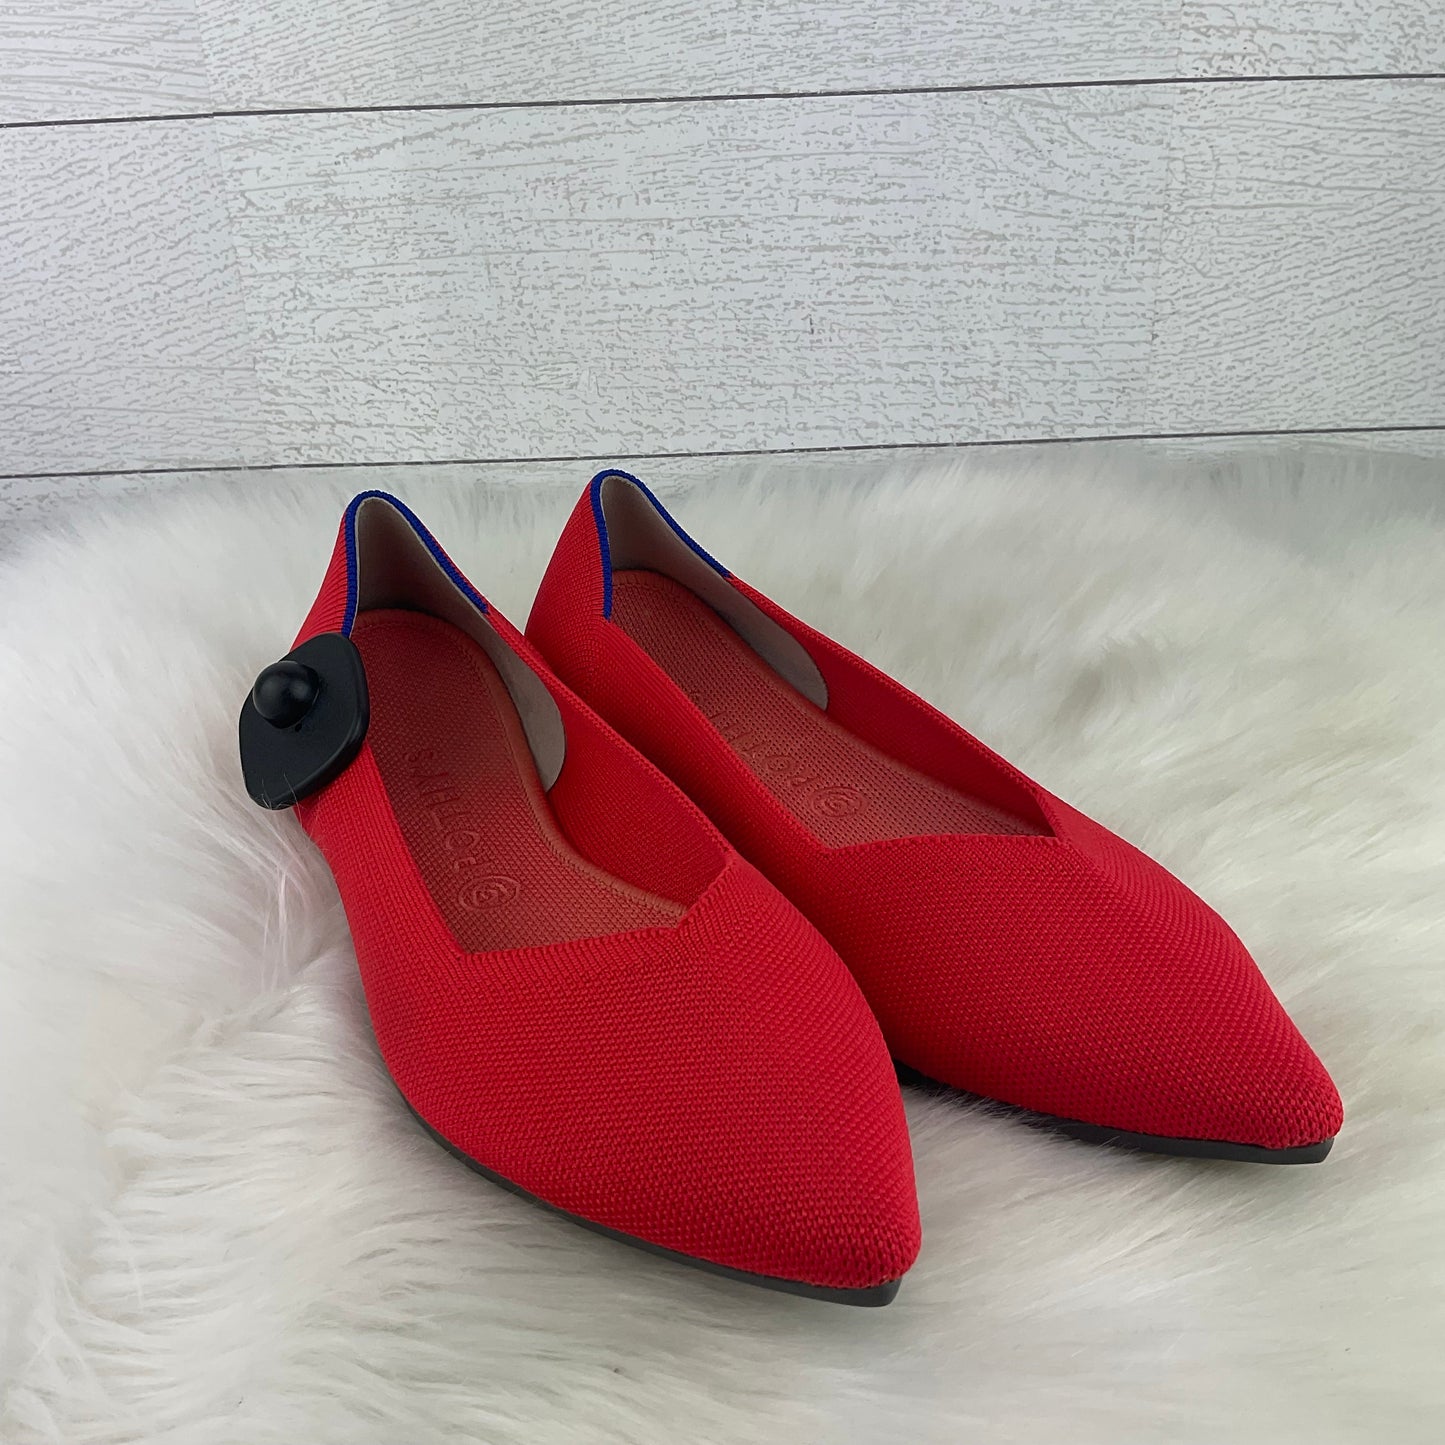 Red Shoes Designer Rothys, Size 11.5